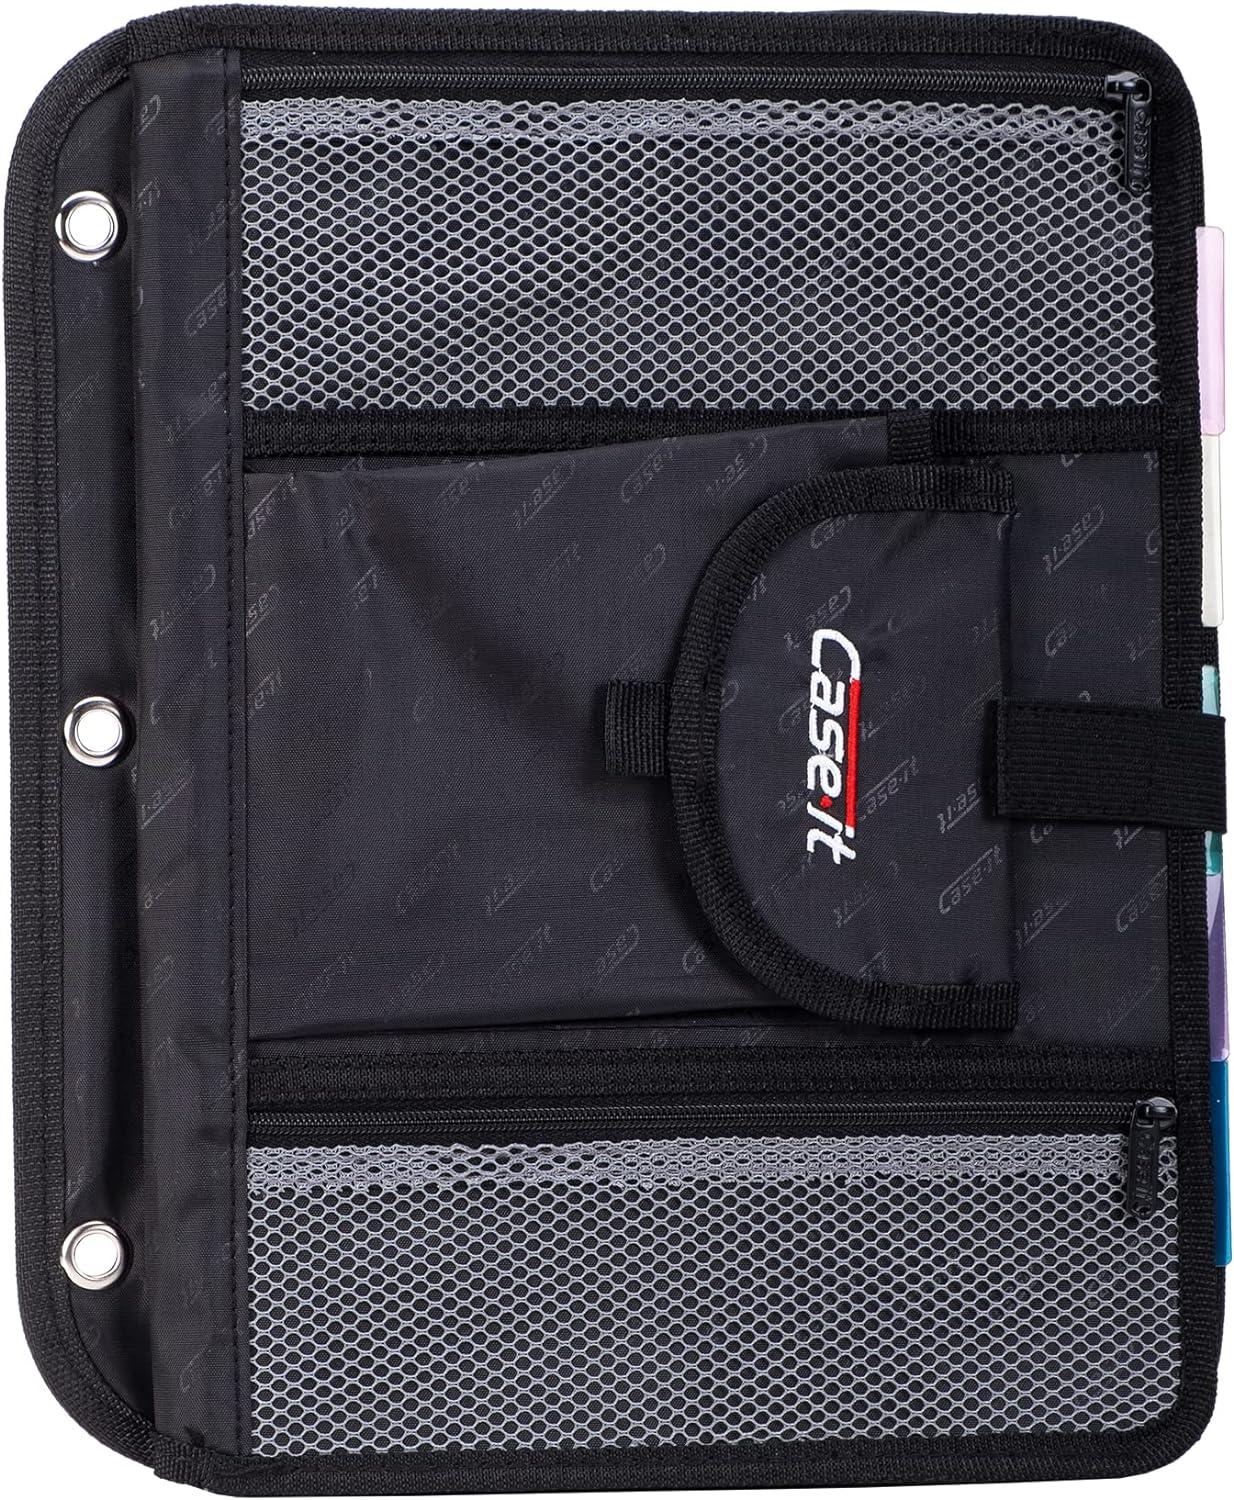 case it 5-tab binder accessory 5-colored tabbed 6 pocket expanding file fits any standard 3 ring letter size